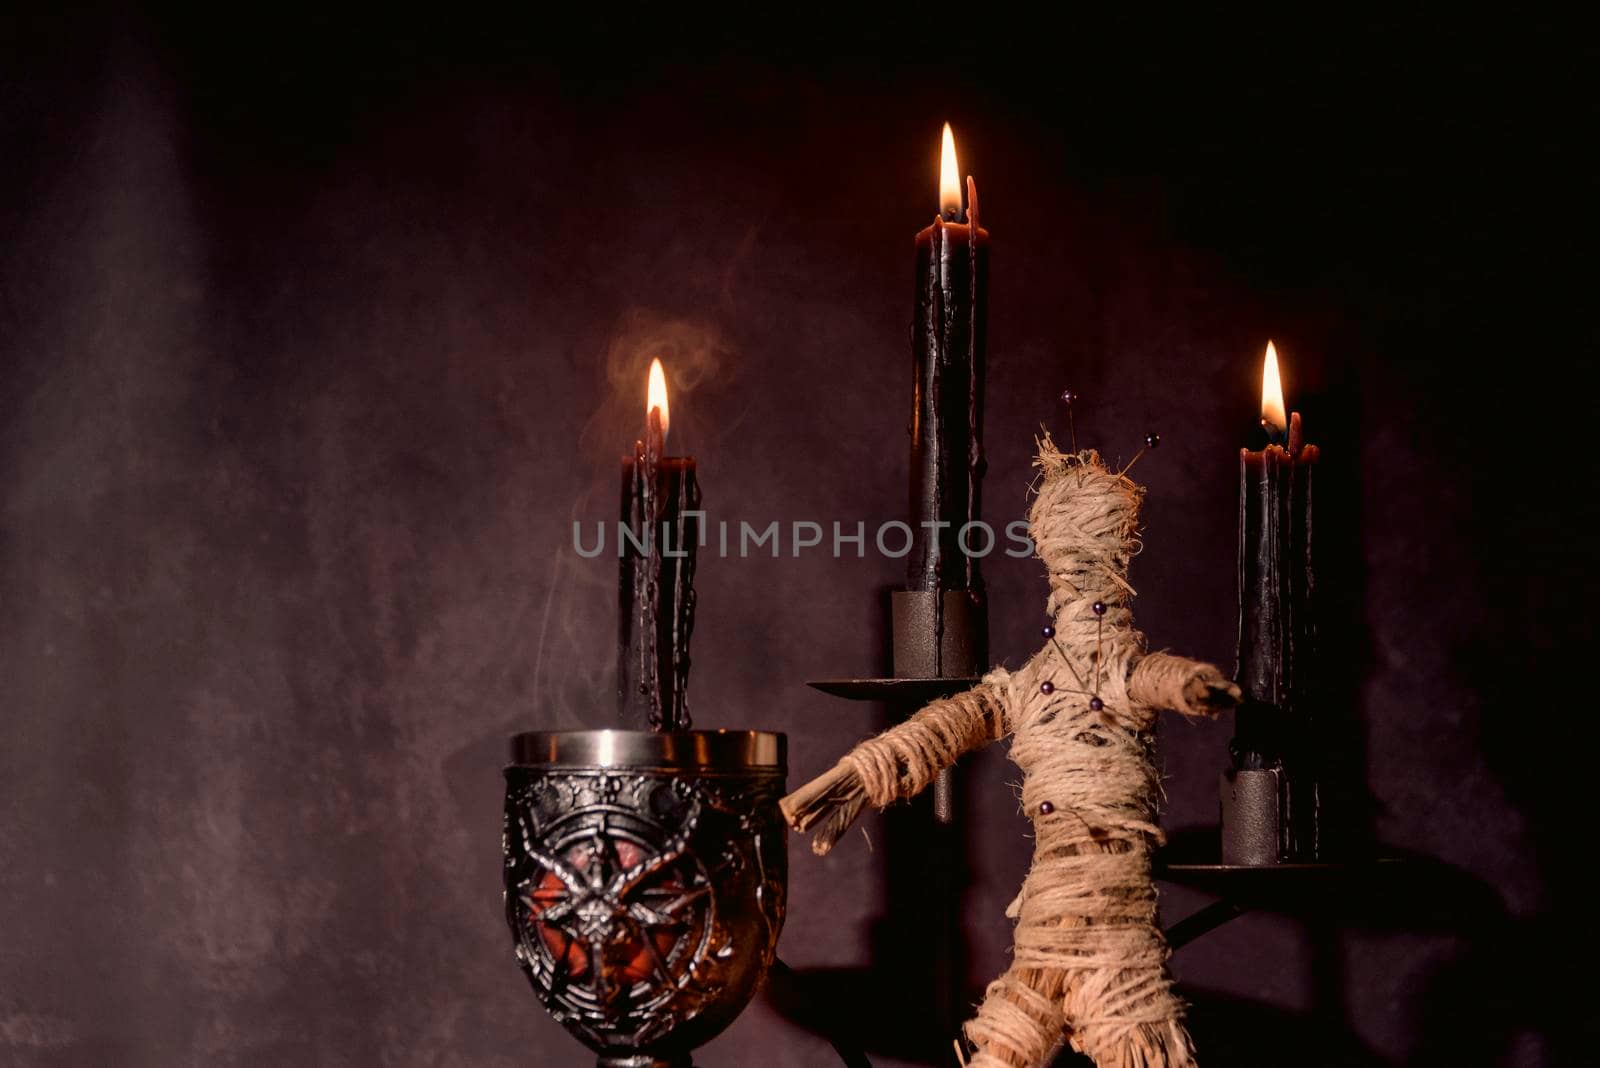 Voodoo Doll on a wooden background with dramatic lighting. by jbruiz78